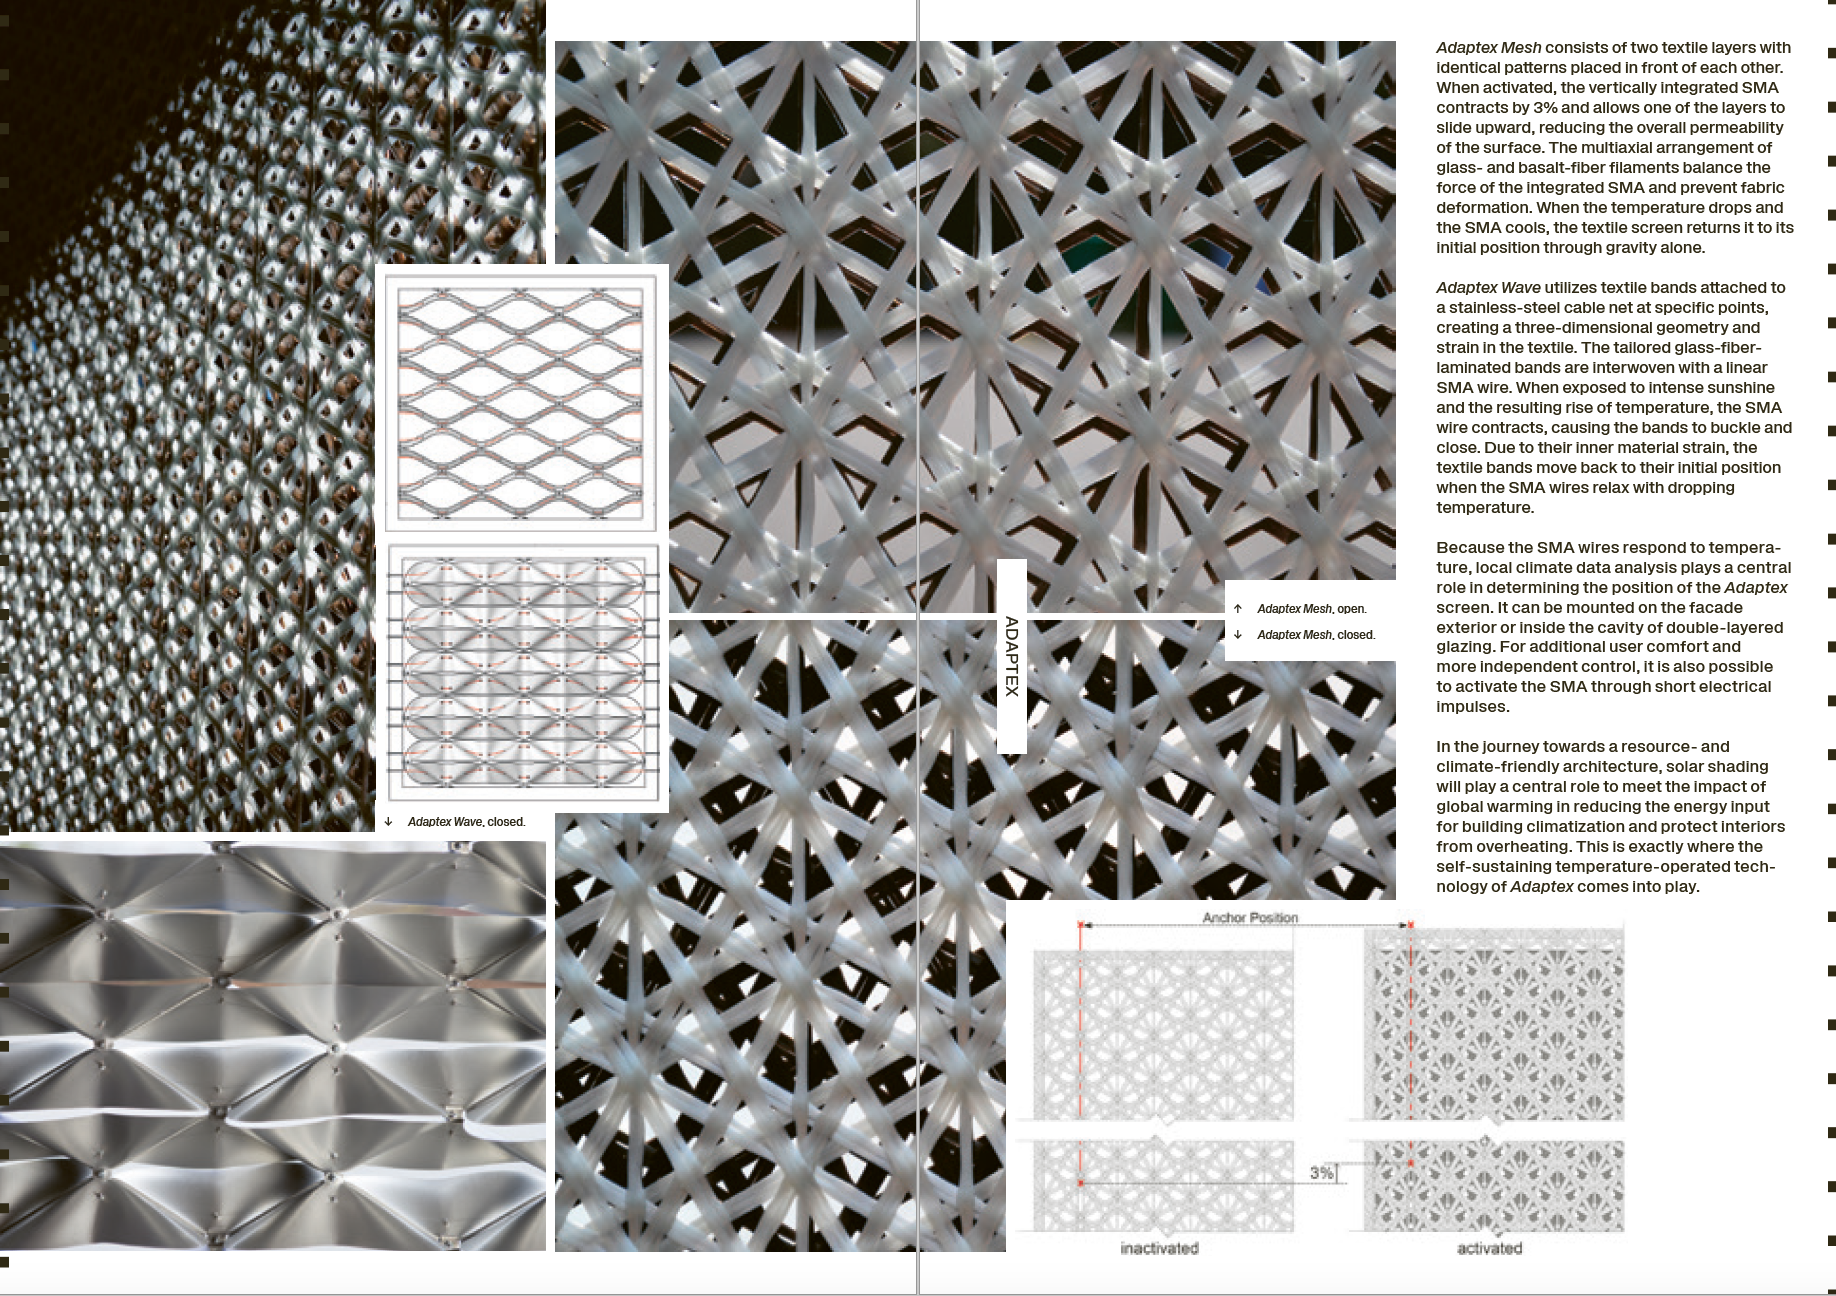 Doppelseite "Architectures of Weaving" Case Study Adaptex